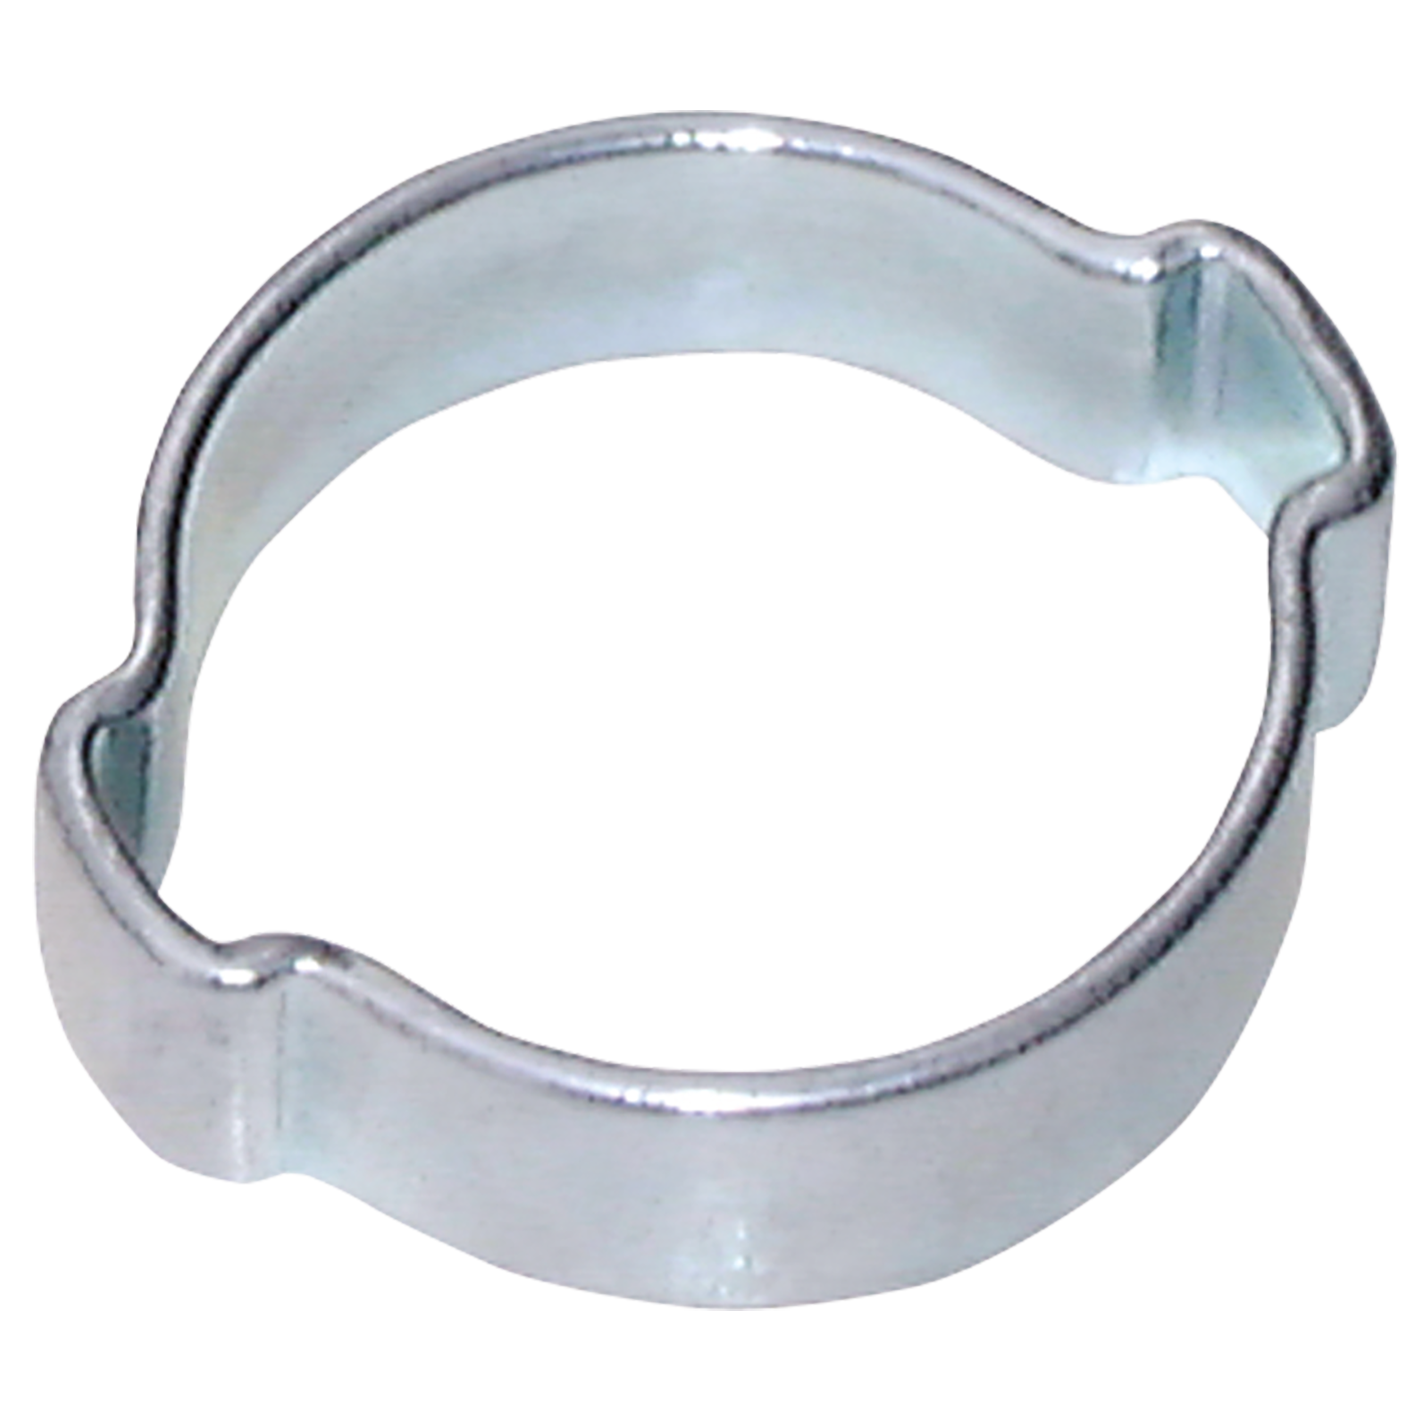 37.0-40.0MM 2-EAR STEEL CLAMP PLATED